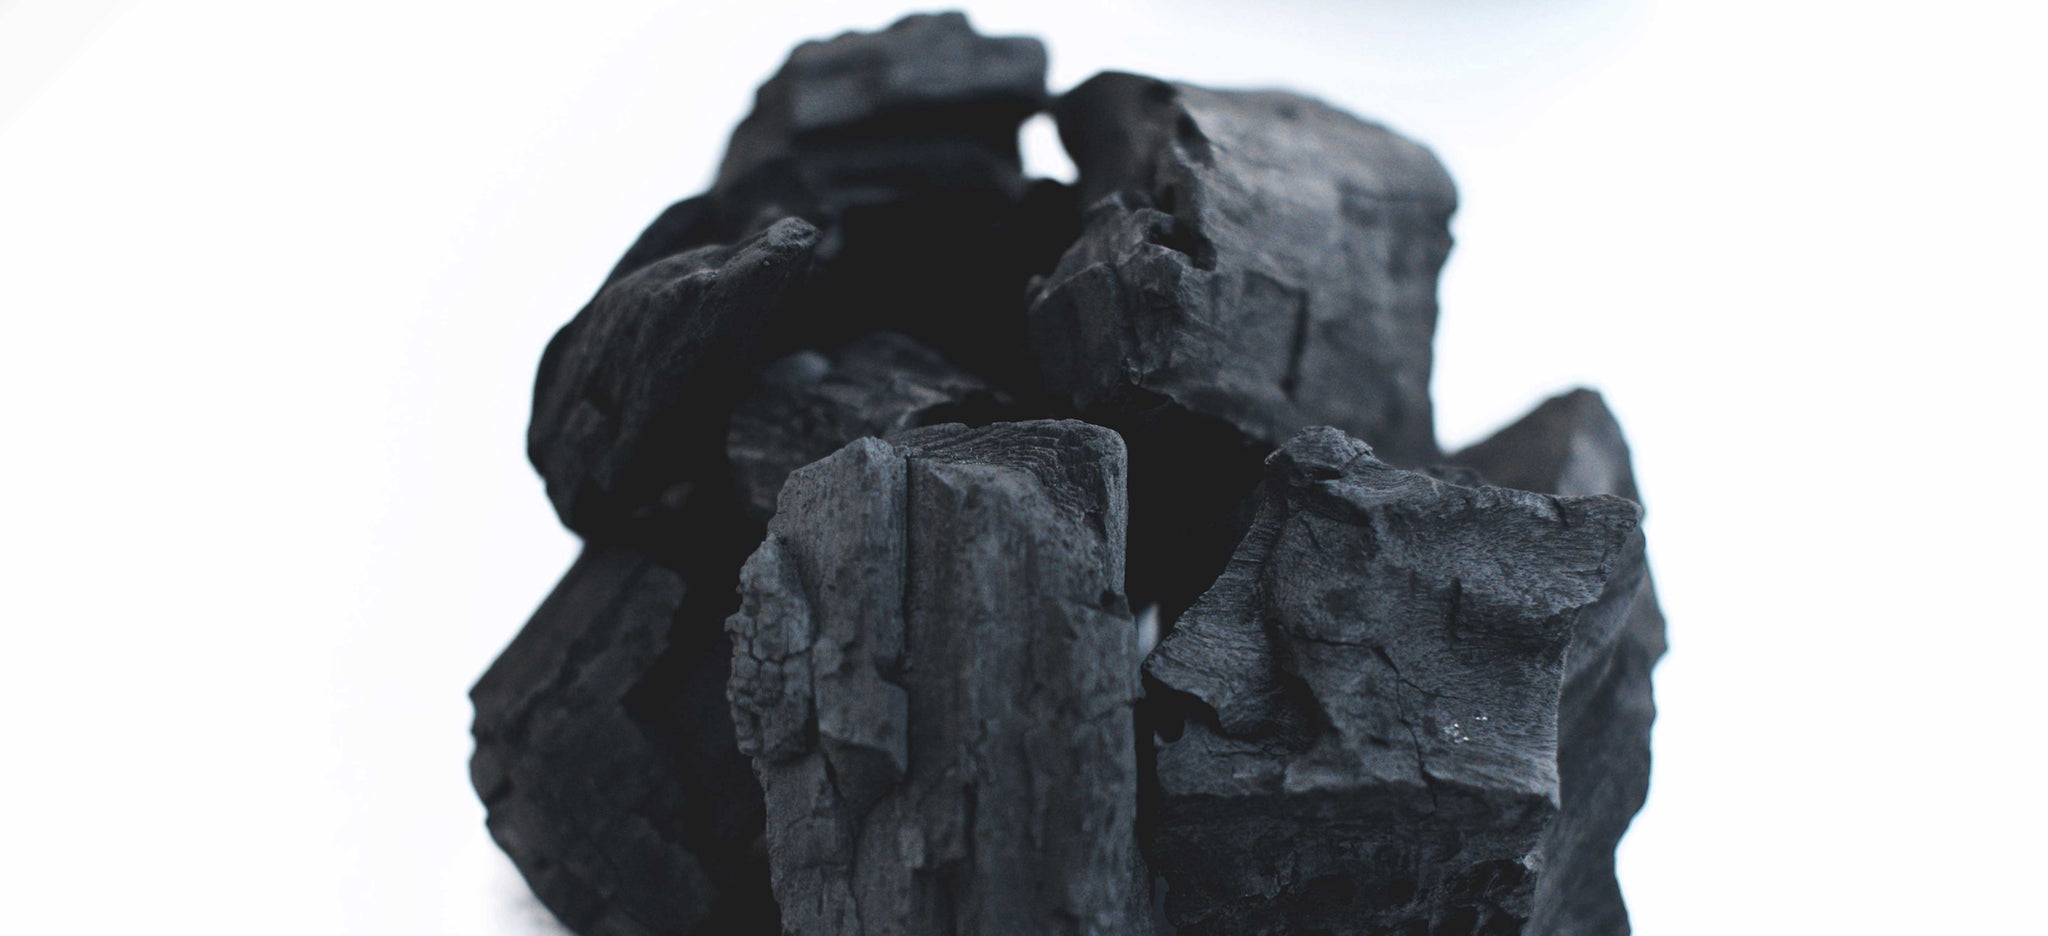 Ethically sourced charcoal